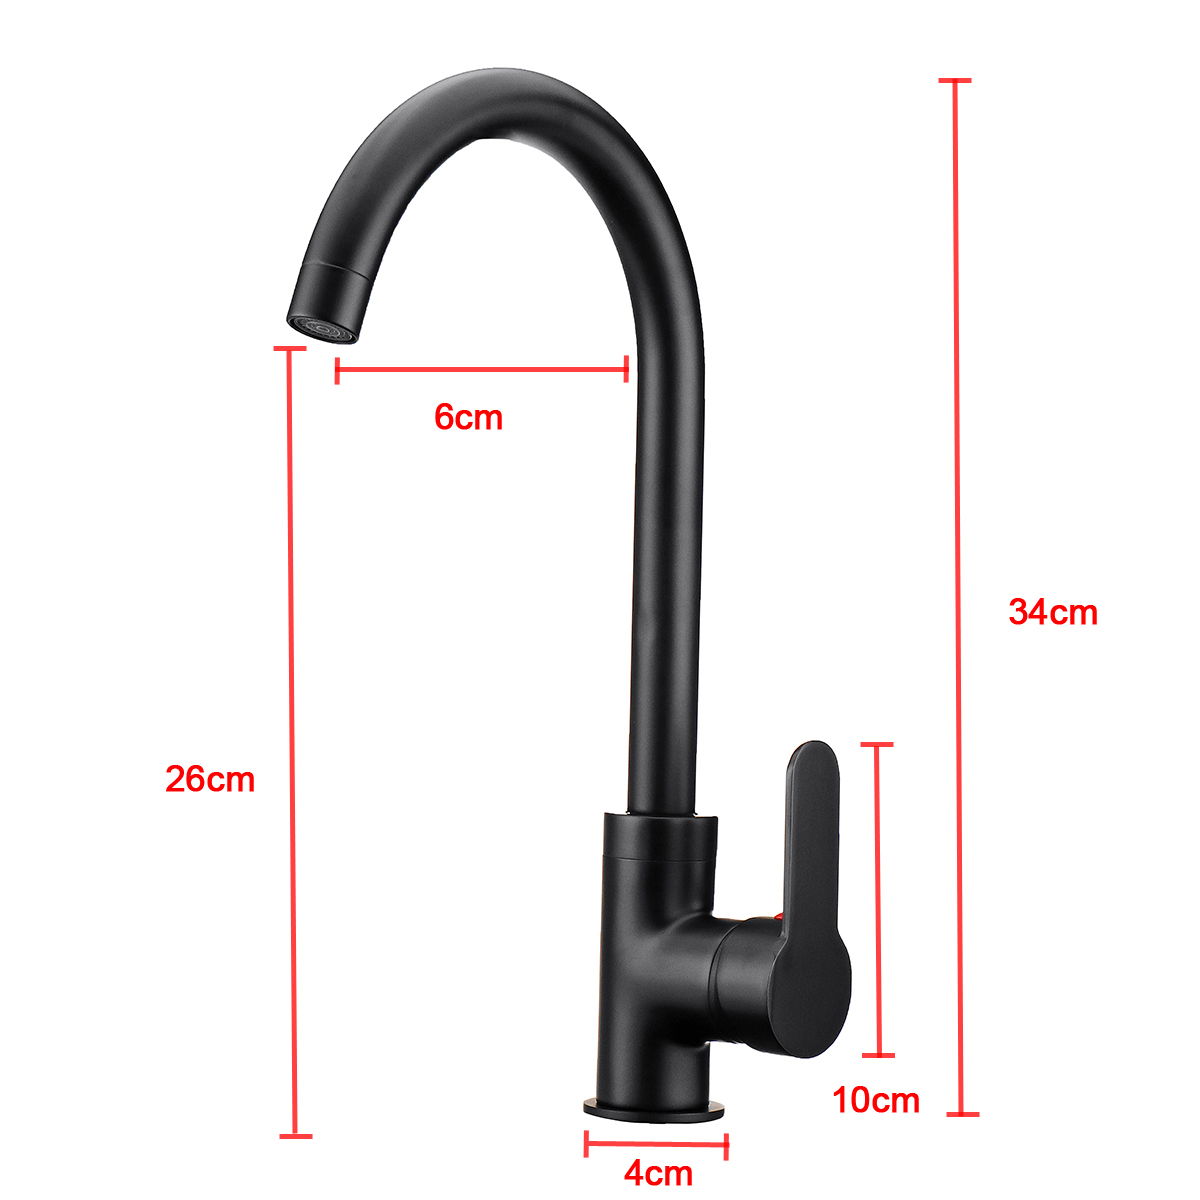 Black-Copper-Kitchen-Faucet-360deg-Rotation-Single-Lever-Hot-amp-Cold-Water-Basin-Sink-Mixer-Tap-1375770